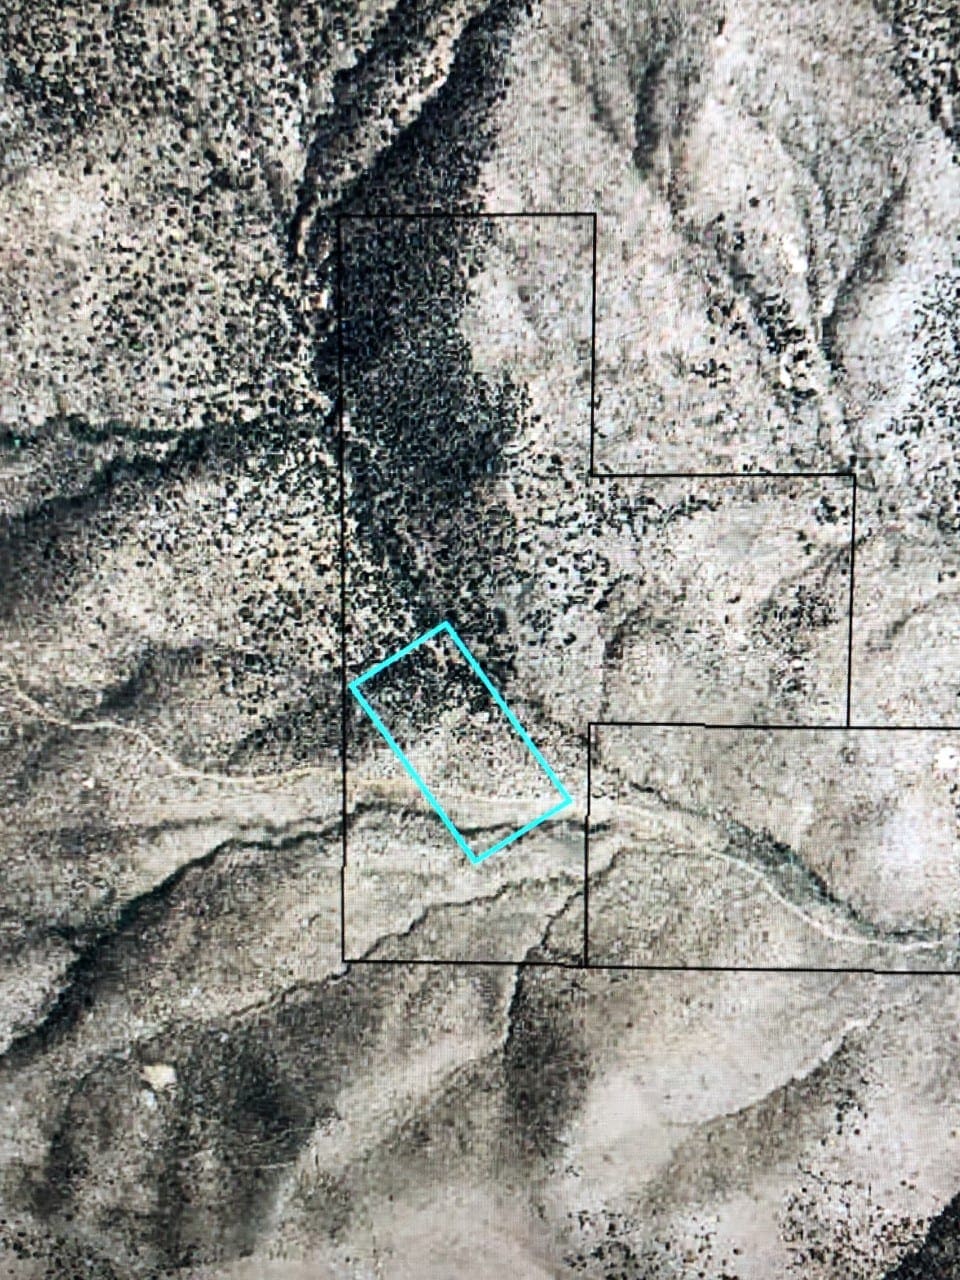 15.84 Acres in GOLD NOTE CANYON, HIDDEN TREASURE #1, SUR 2097 – A PATENTED MINING CLAIM -PAST PRODUCER OF GOLD, SILVER & ZINC photo 41